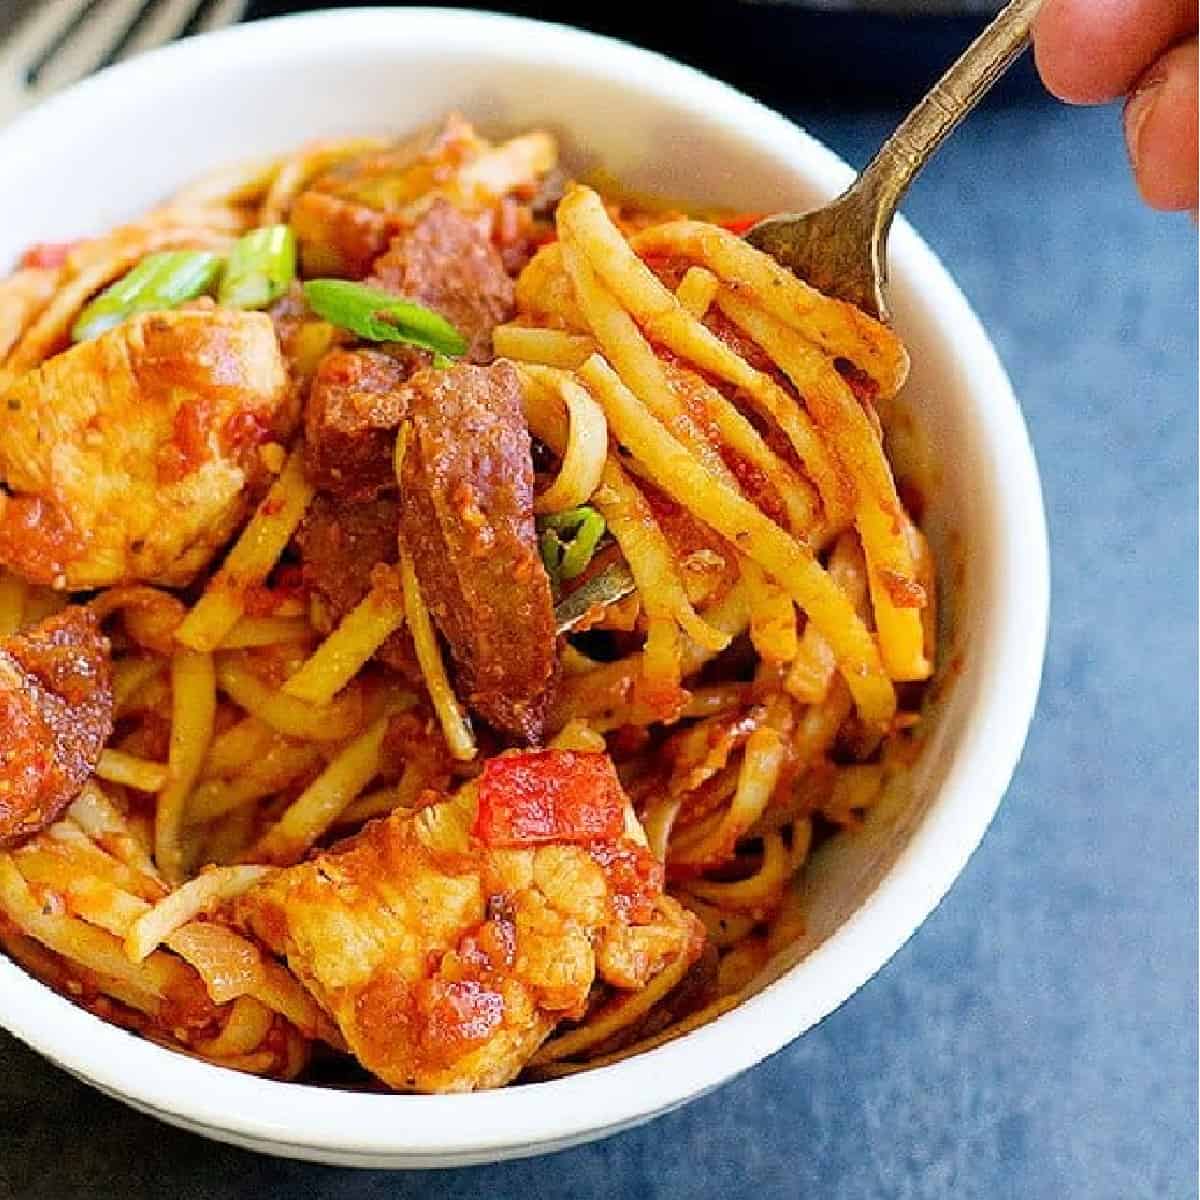 Have a warm bowl of One Pan Jambalaya Pasta any day of the year - this dish is full of flavors and takes less than an hour to come together. Perfect comfort food!
